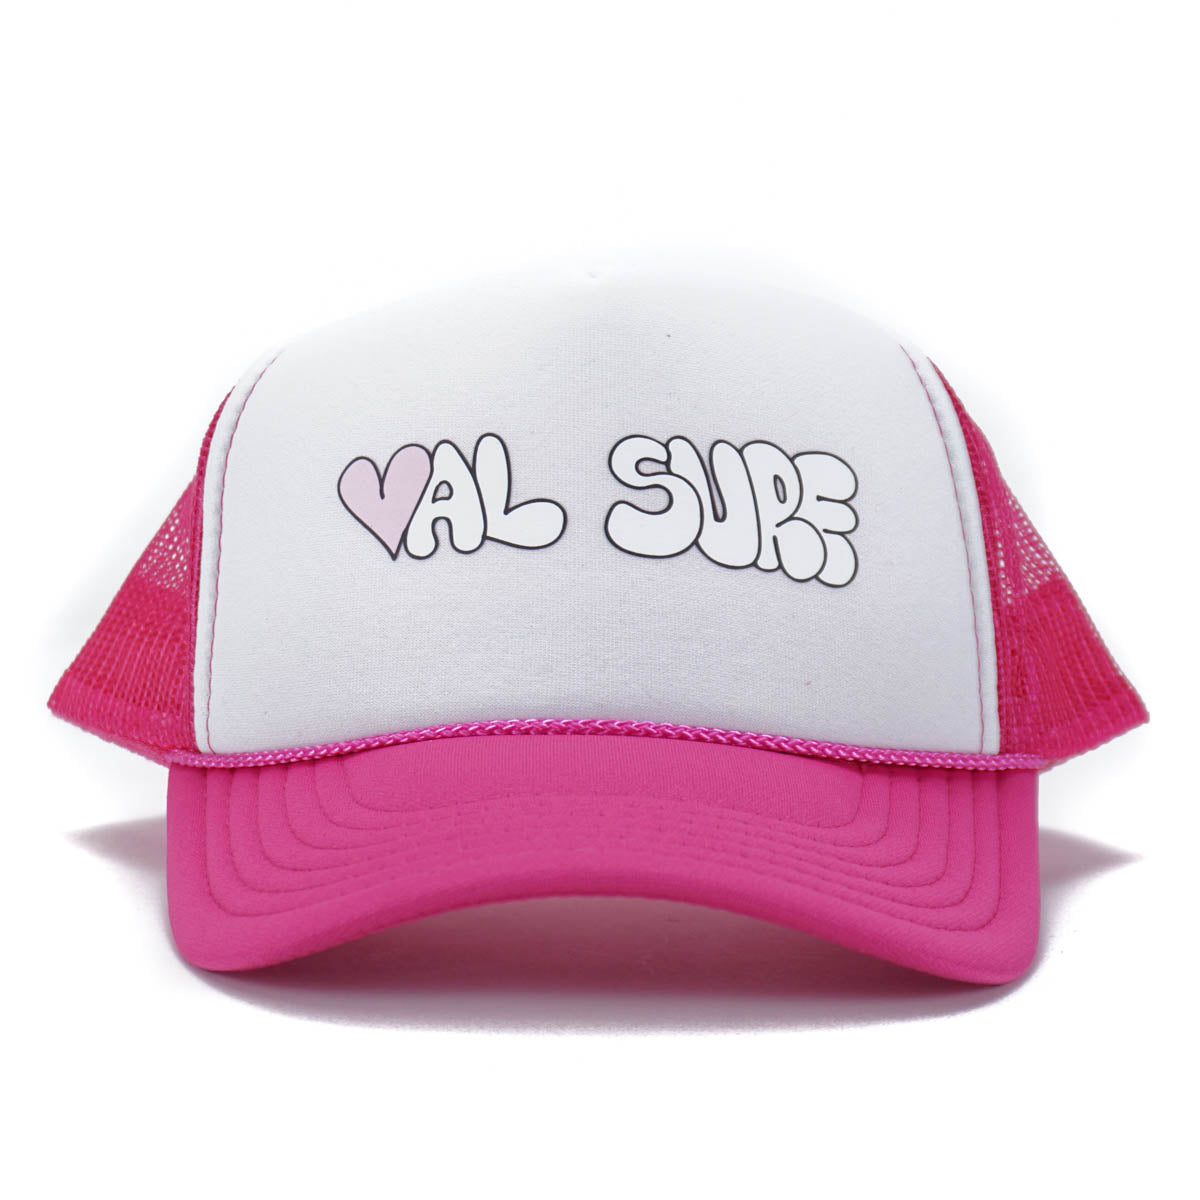 Heart Logo Adult Hat - Hot Pink / White / Hot Pink